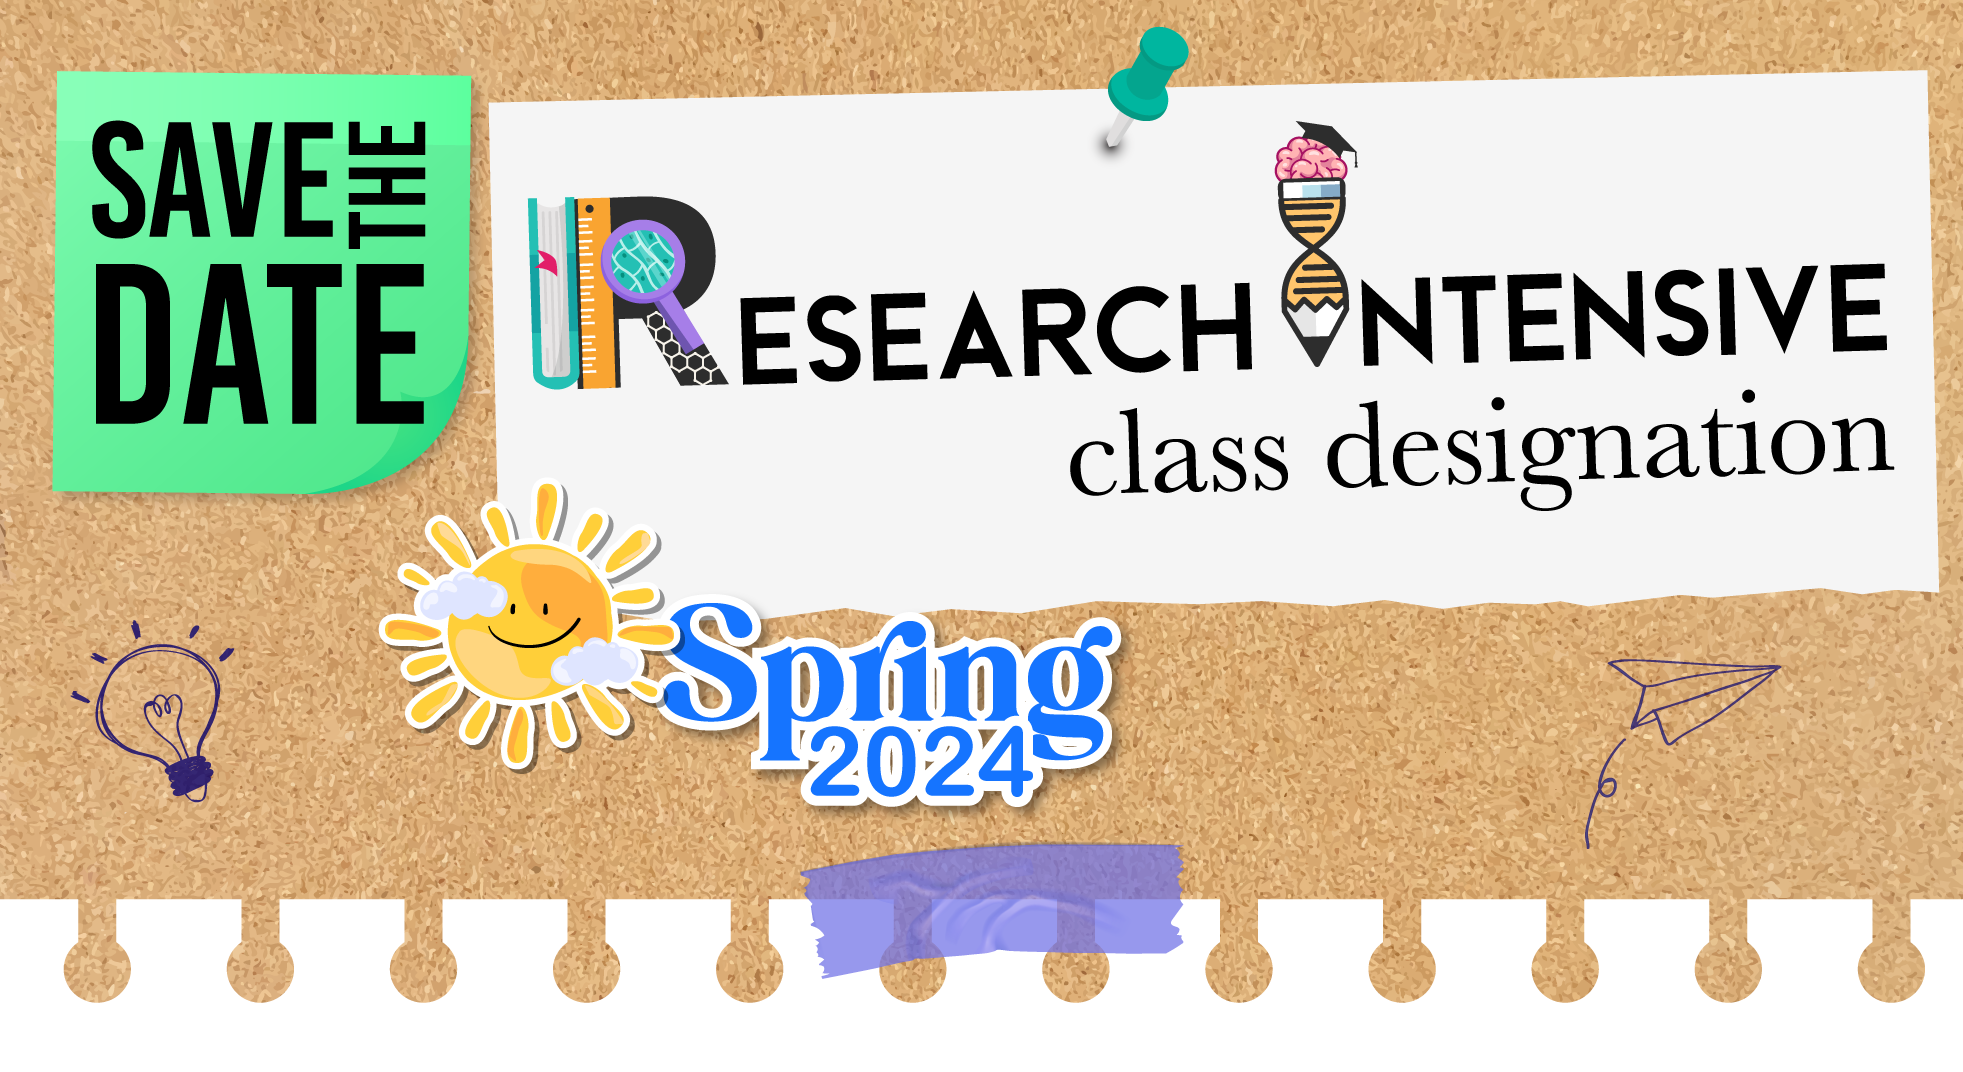 Save the date for research intensive class designation.